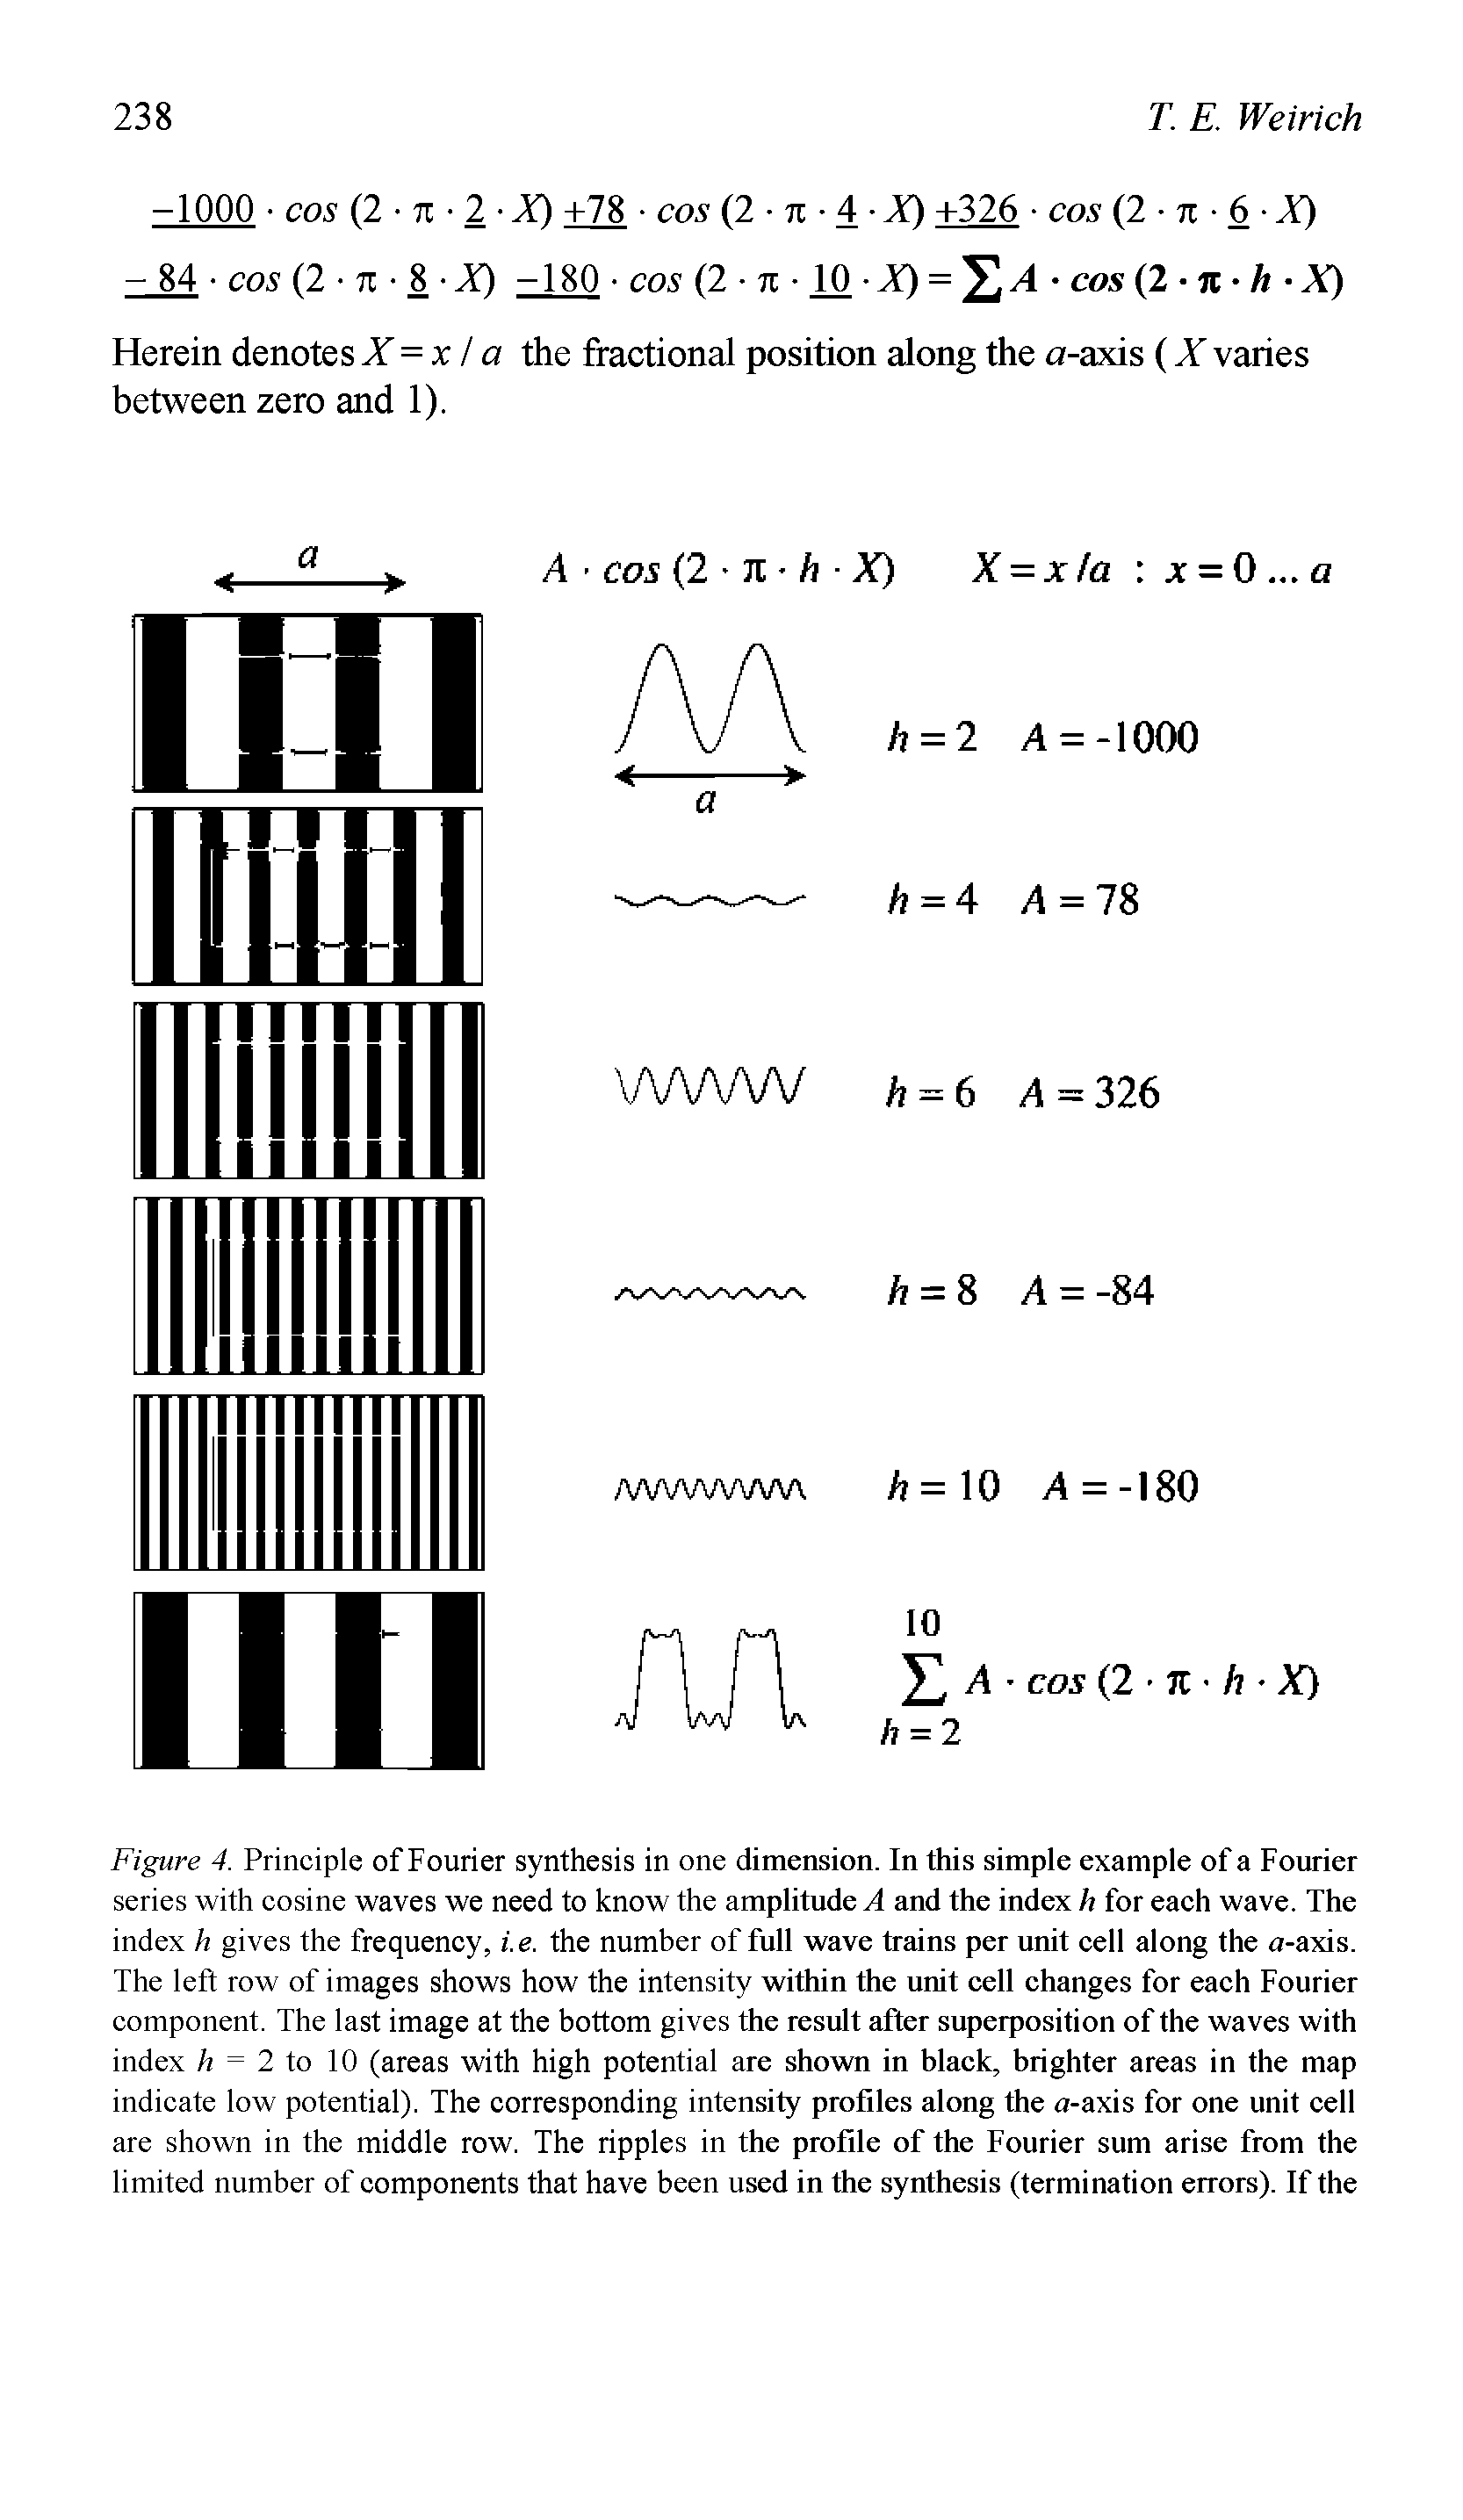 Figure 4. Principle of Fourier synthesis in one dimension. In this simple example of a Fourier series with cosine waves we need to know the amplitude A and the index h for each wave. The index h gives the frequency, i.e. the number of full wave trains per unit cell along the a-axis. The left row of images shows how the intensity within the unit eell ehanges for each Fourier component. The last image at the bottom gives the result after superposition of the waves with index /z = 2 to 10 (areas with high potential are shown in black, brighter areas in the map indicate low potential). The corresponding intensity profiles along the a-axis for one unit cell are shown in the middle row. The ripples in the profile of the Fourier sum arise from the limited number of eomponents that have been used in the synthesis (termination errors). If the...